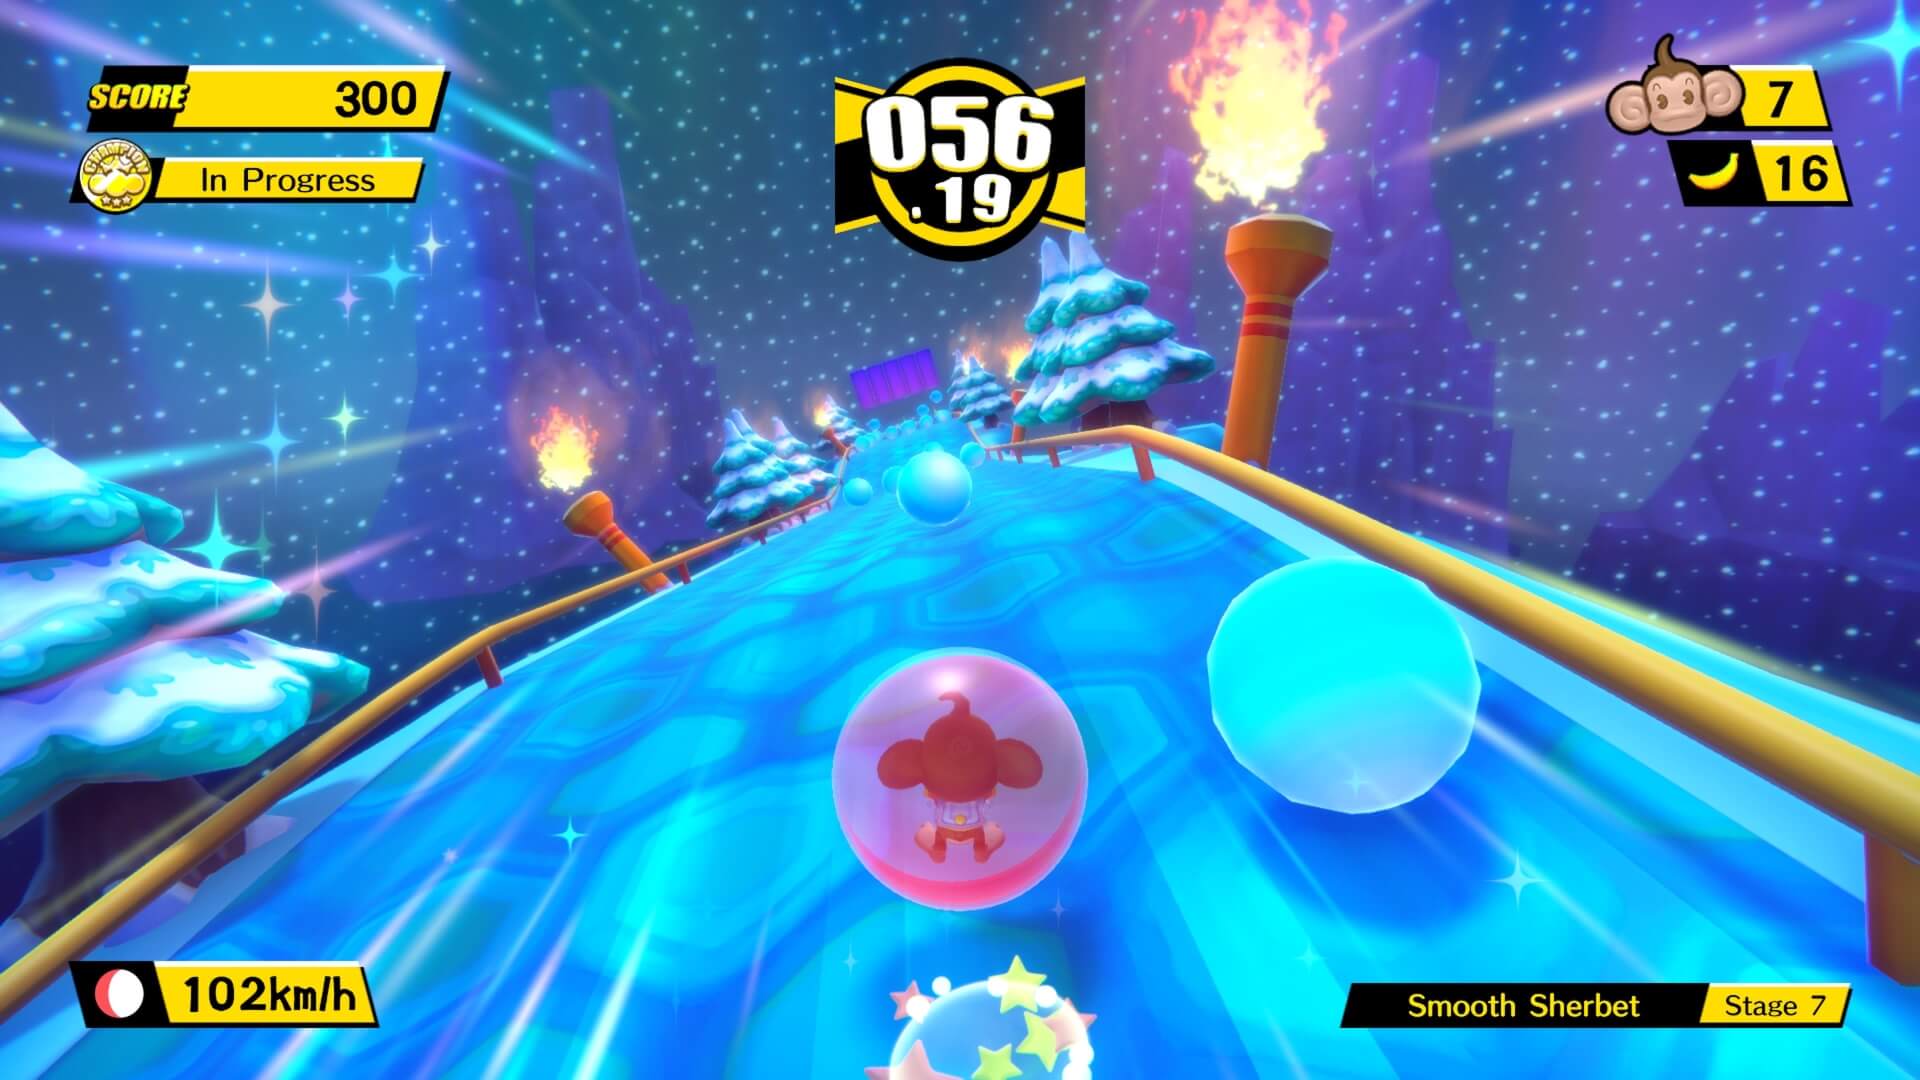 One of the Smooth Sherbet levels in Super Monkey Ball: Banana Blitz HD